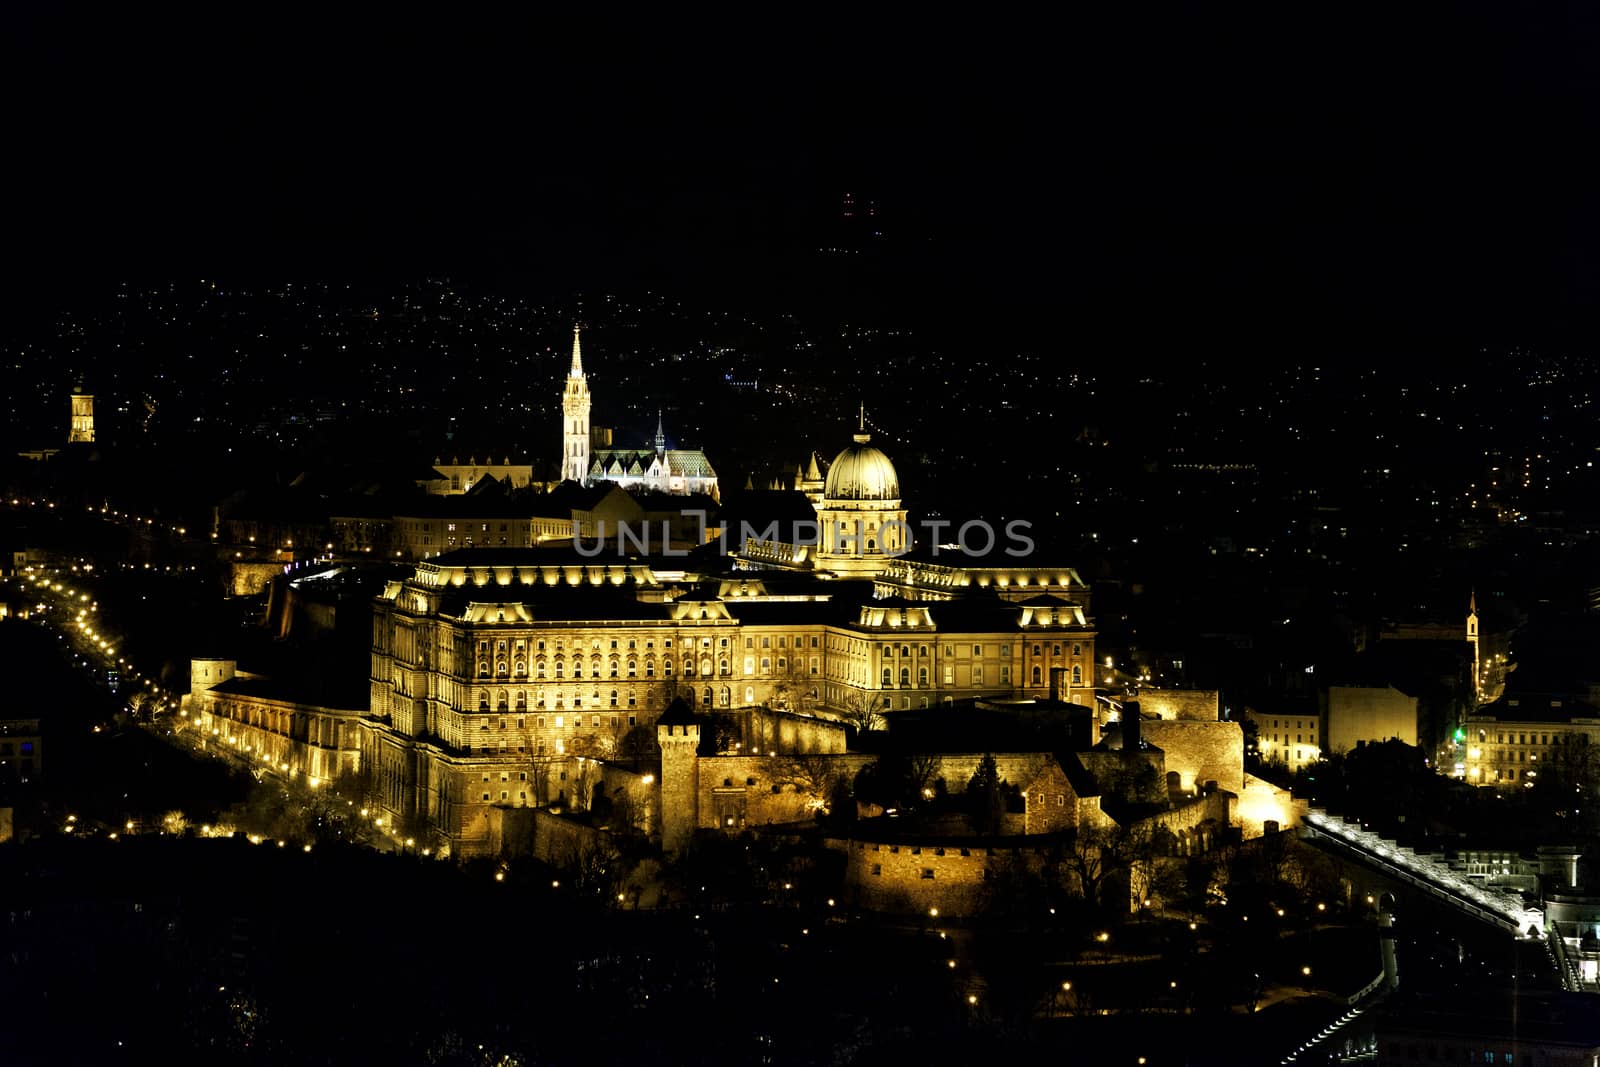 Buda Castle in Budapest illuminated at night by Goodday